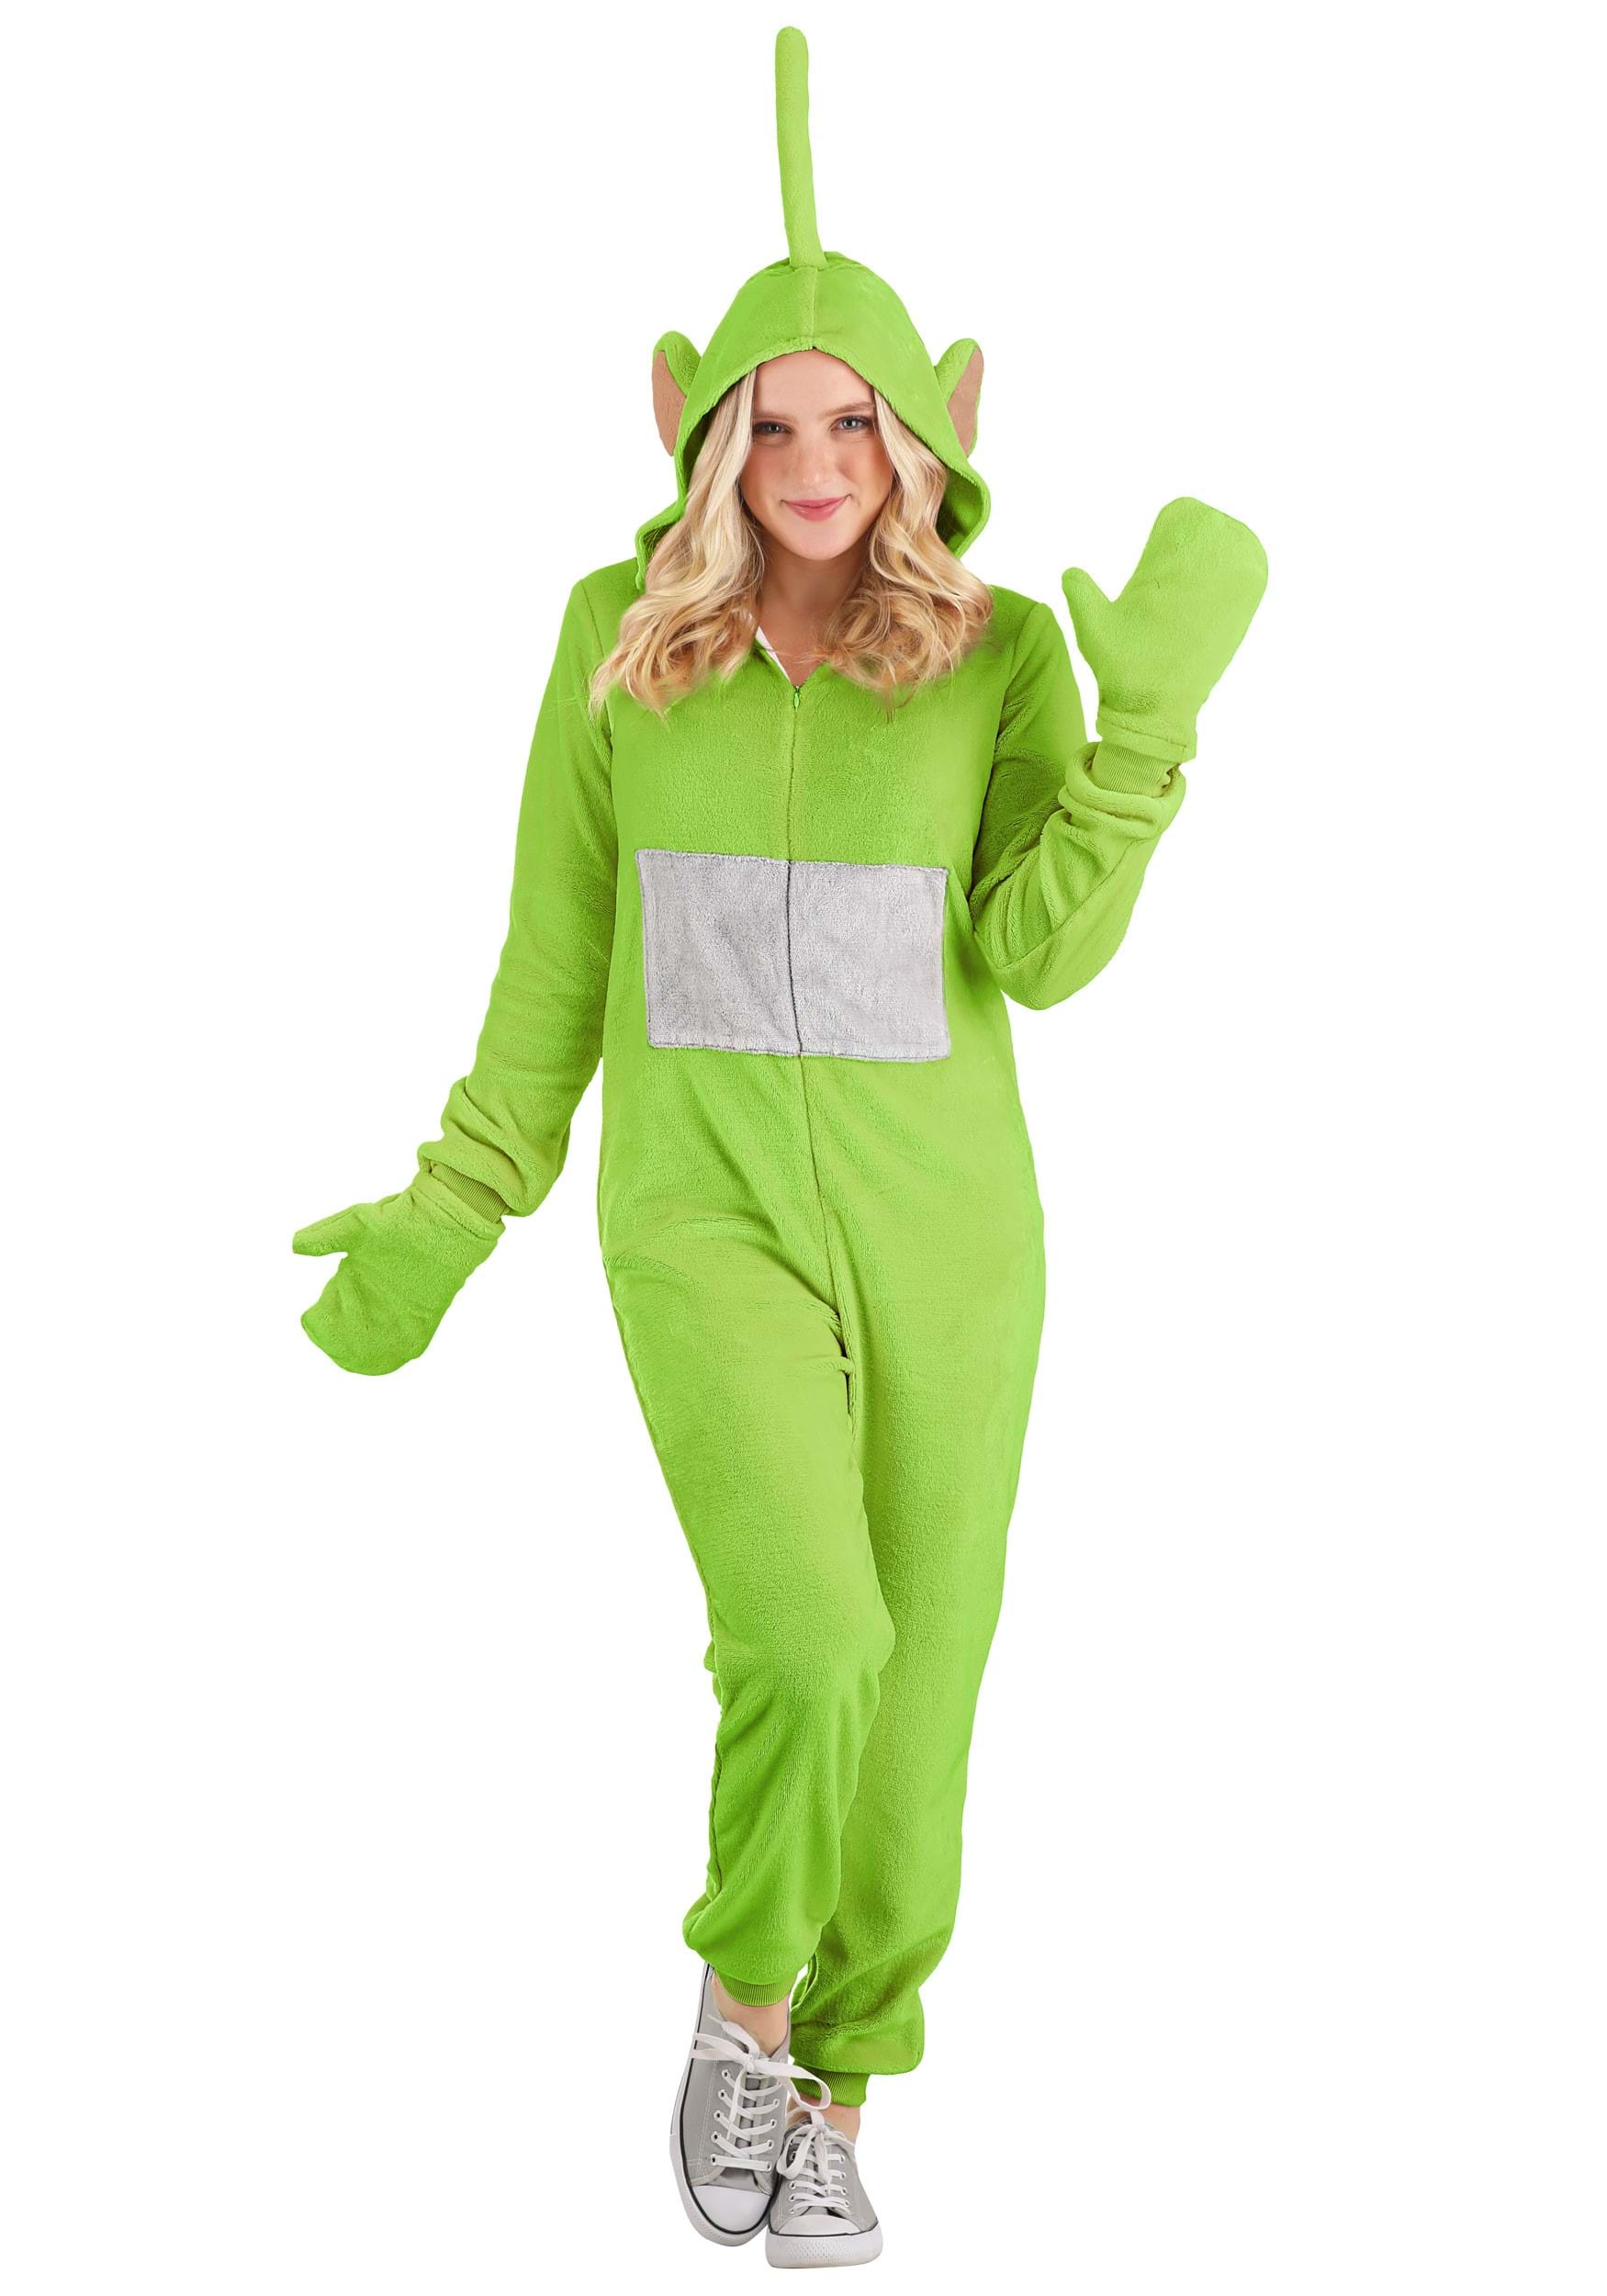 Photos - Fancy Dress FUN Costumes Teletubbies Dipsy Jumpsuit Costume Adult Size | Teletubbies O